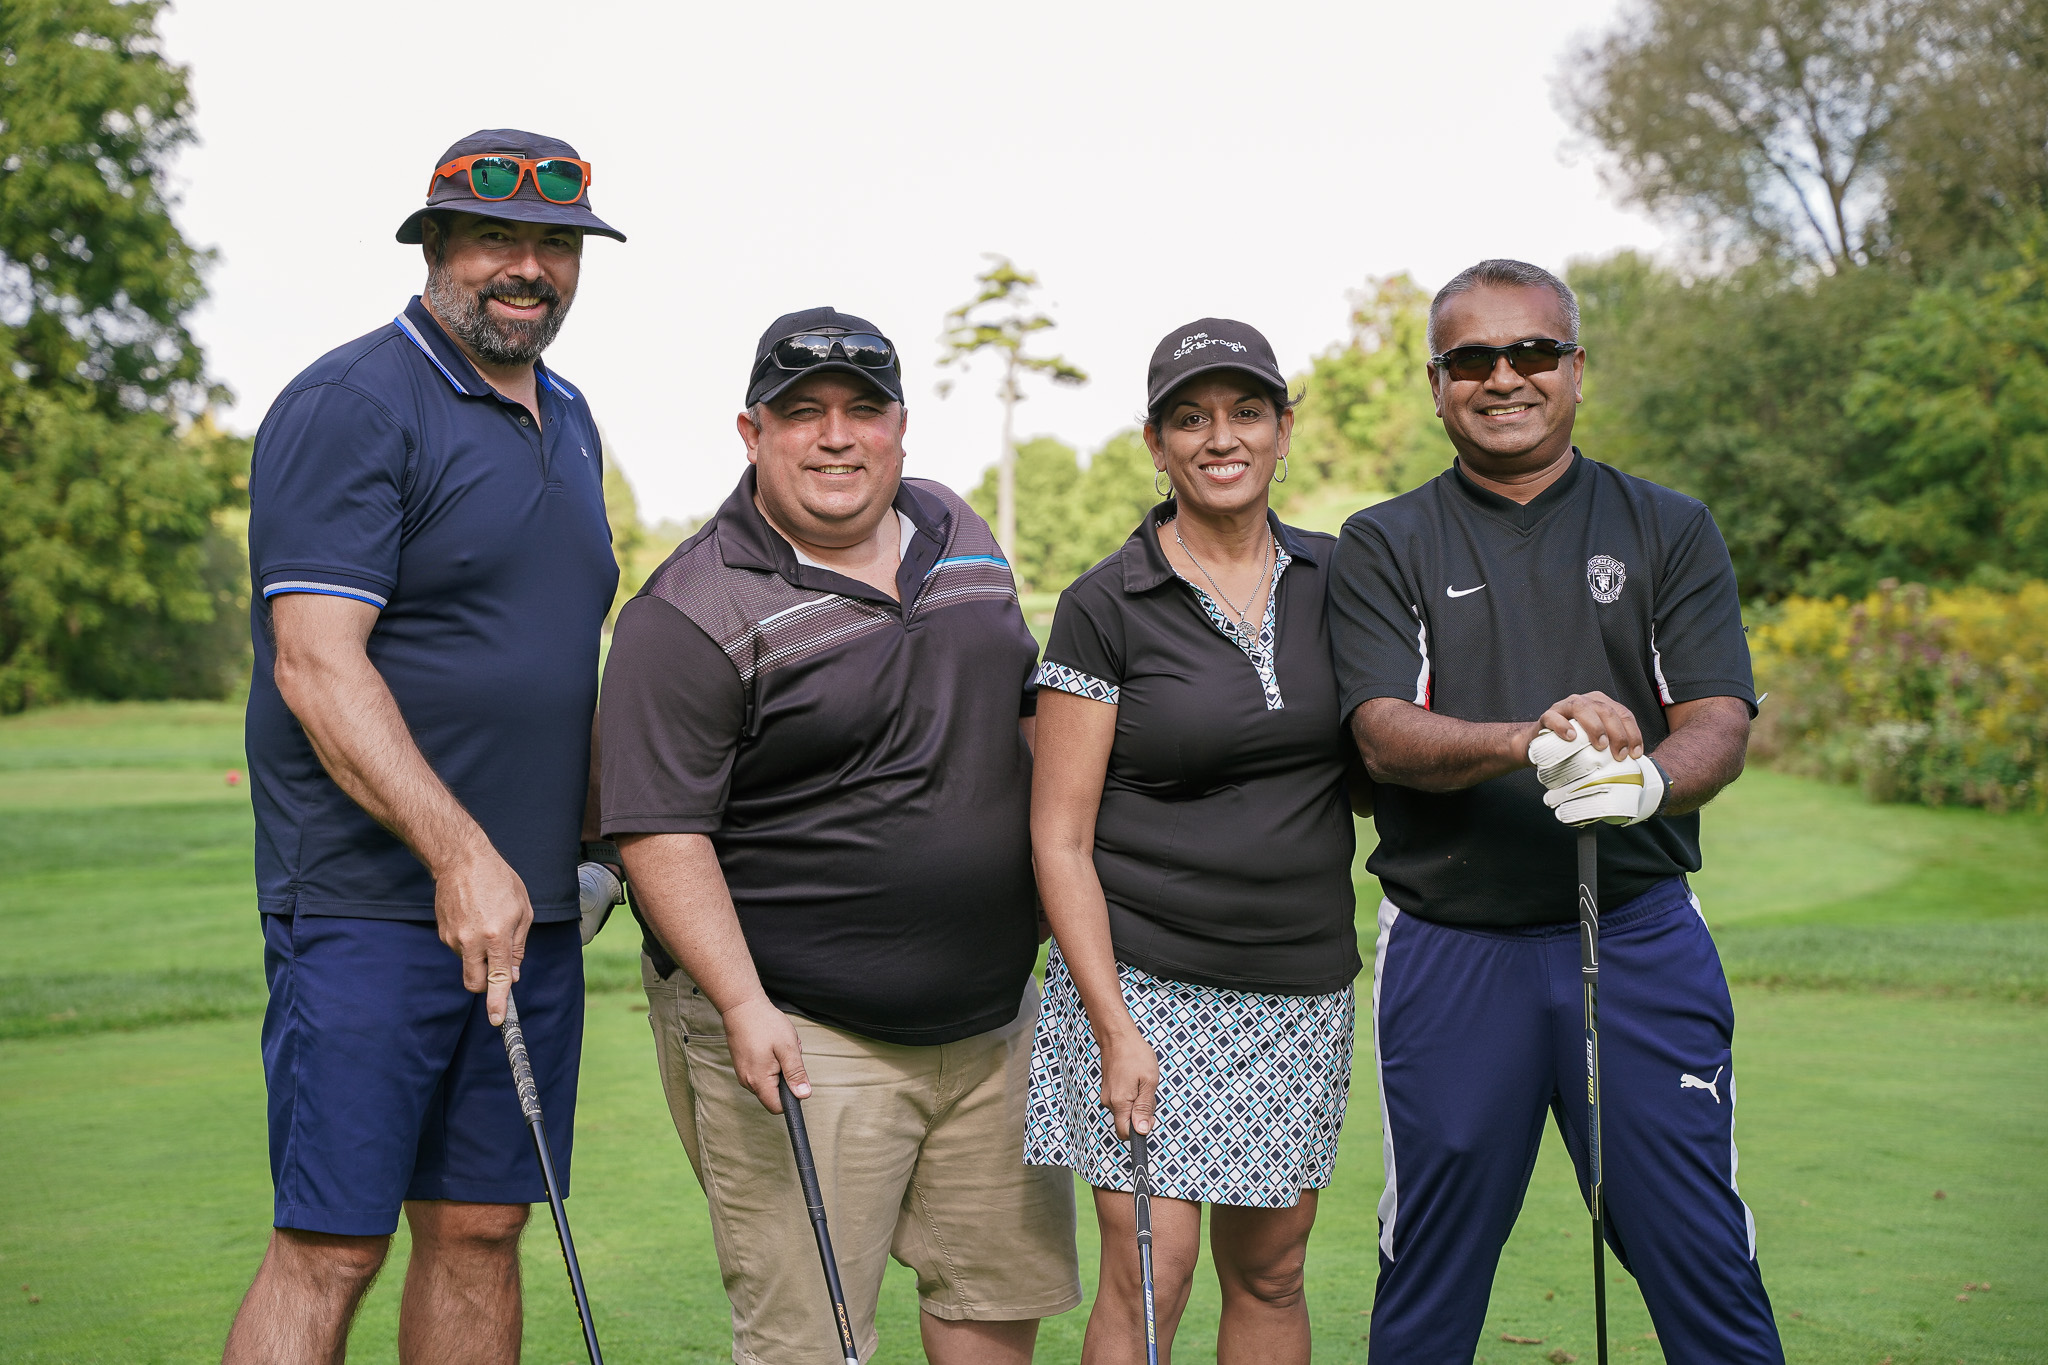 Annual Golf Tournament - The Engineering Center Education Trust